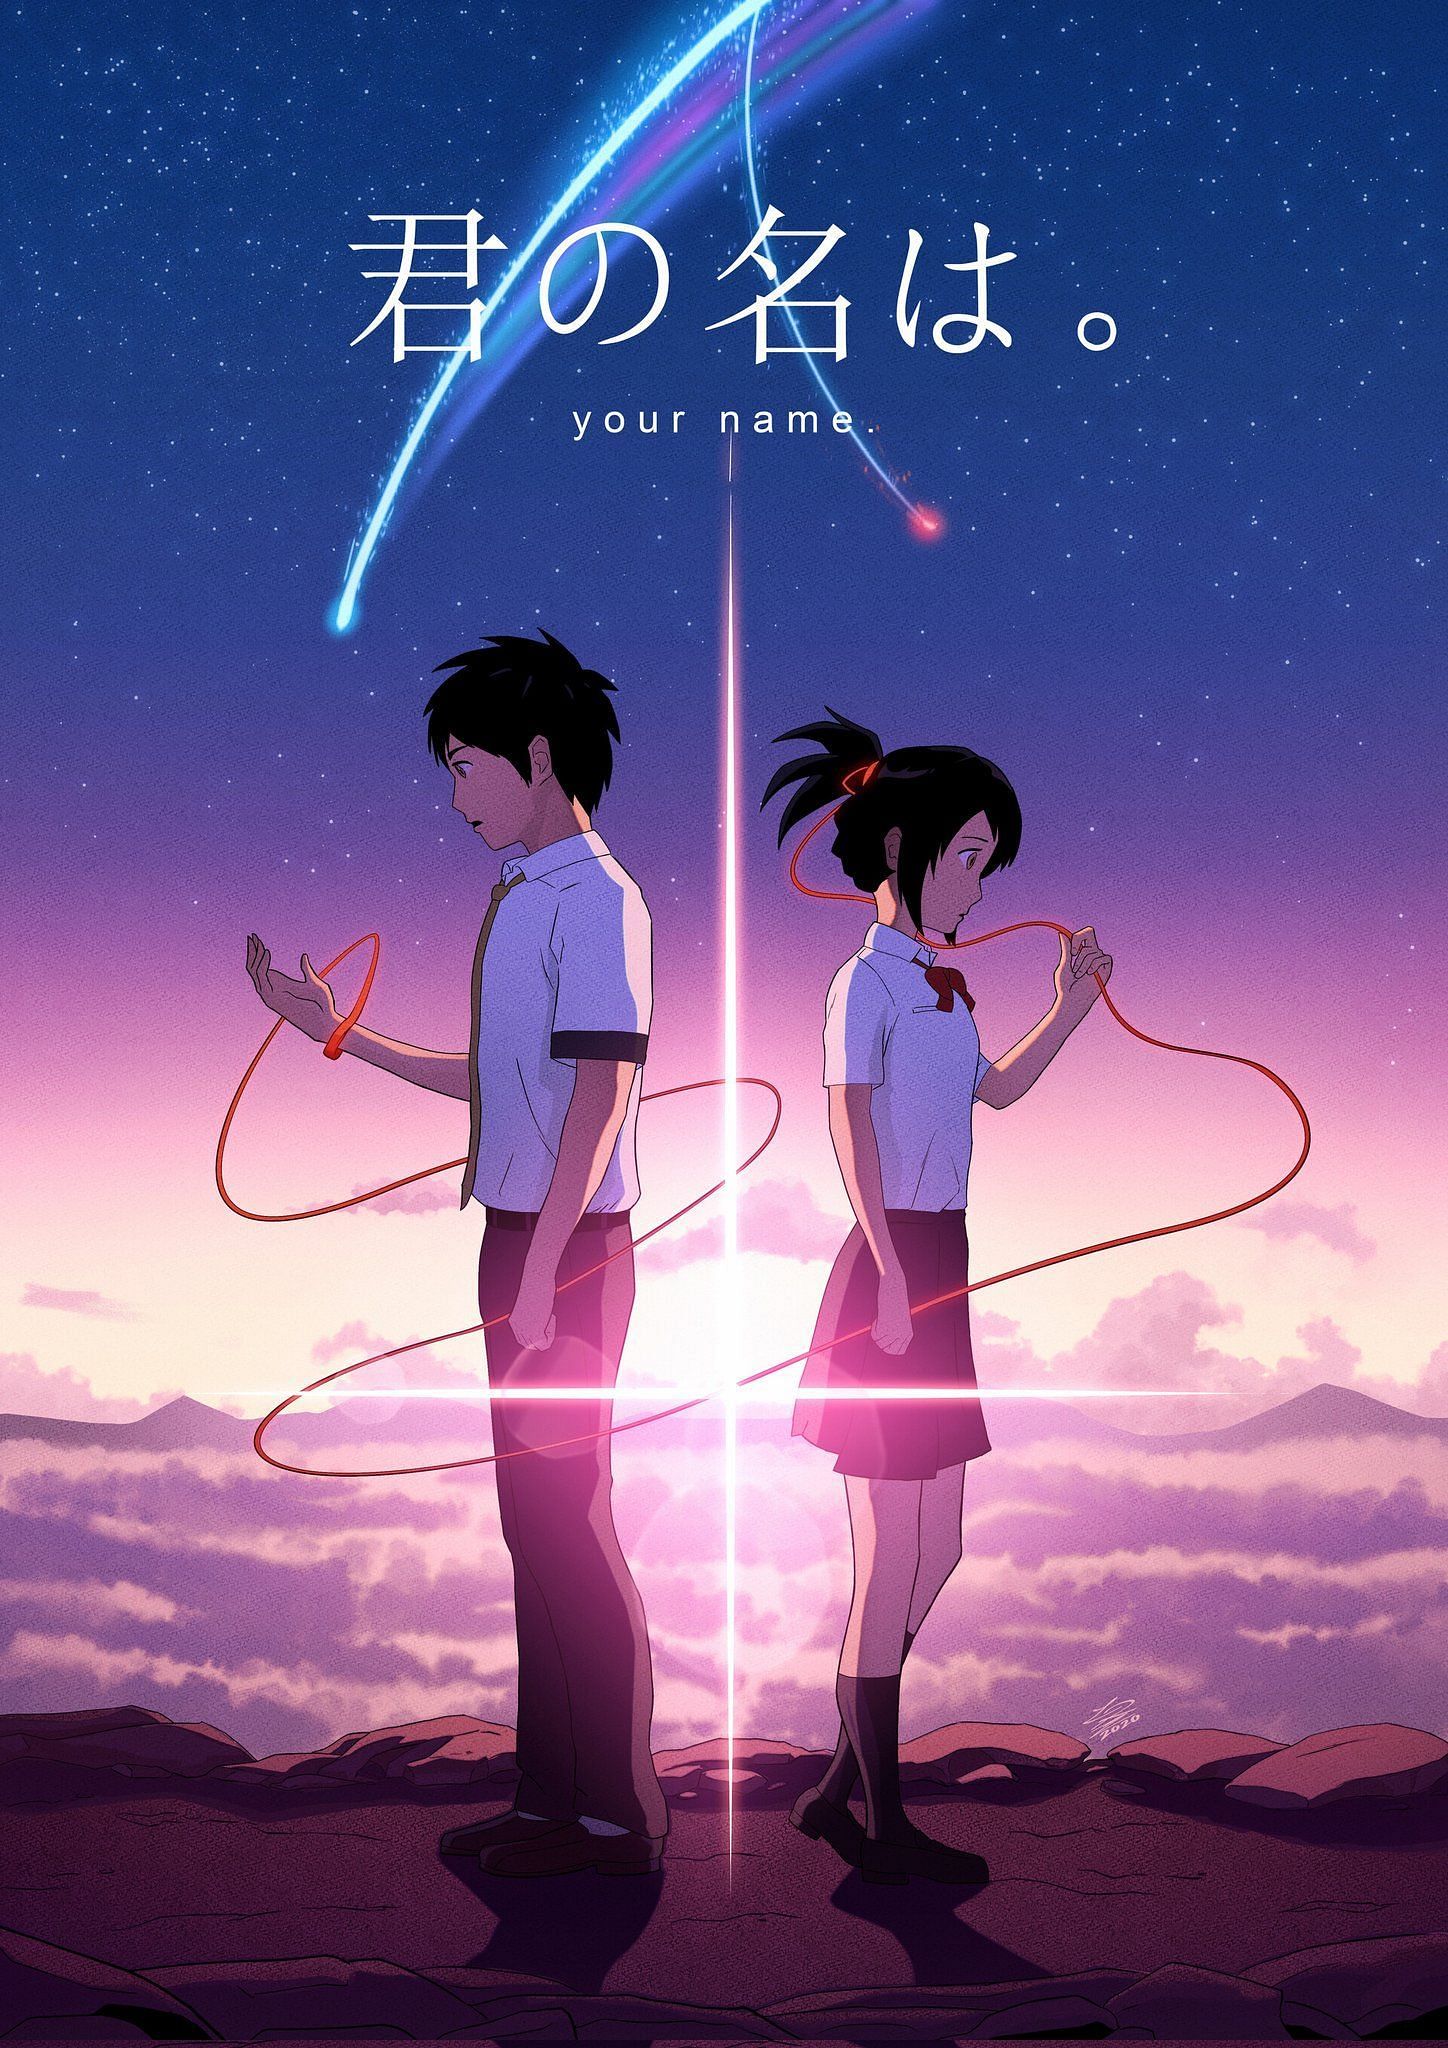 Your Name movie poster (Image Via CoMix Wave Films)